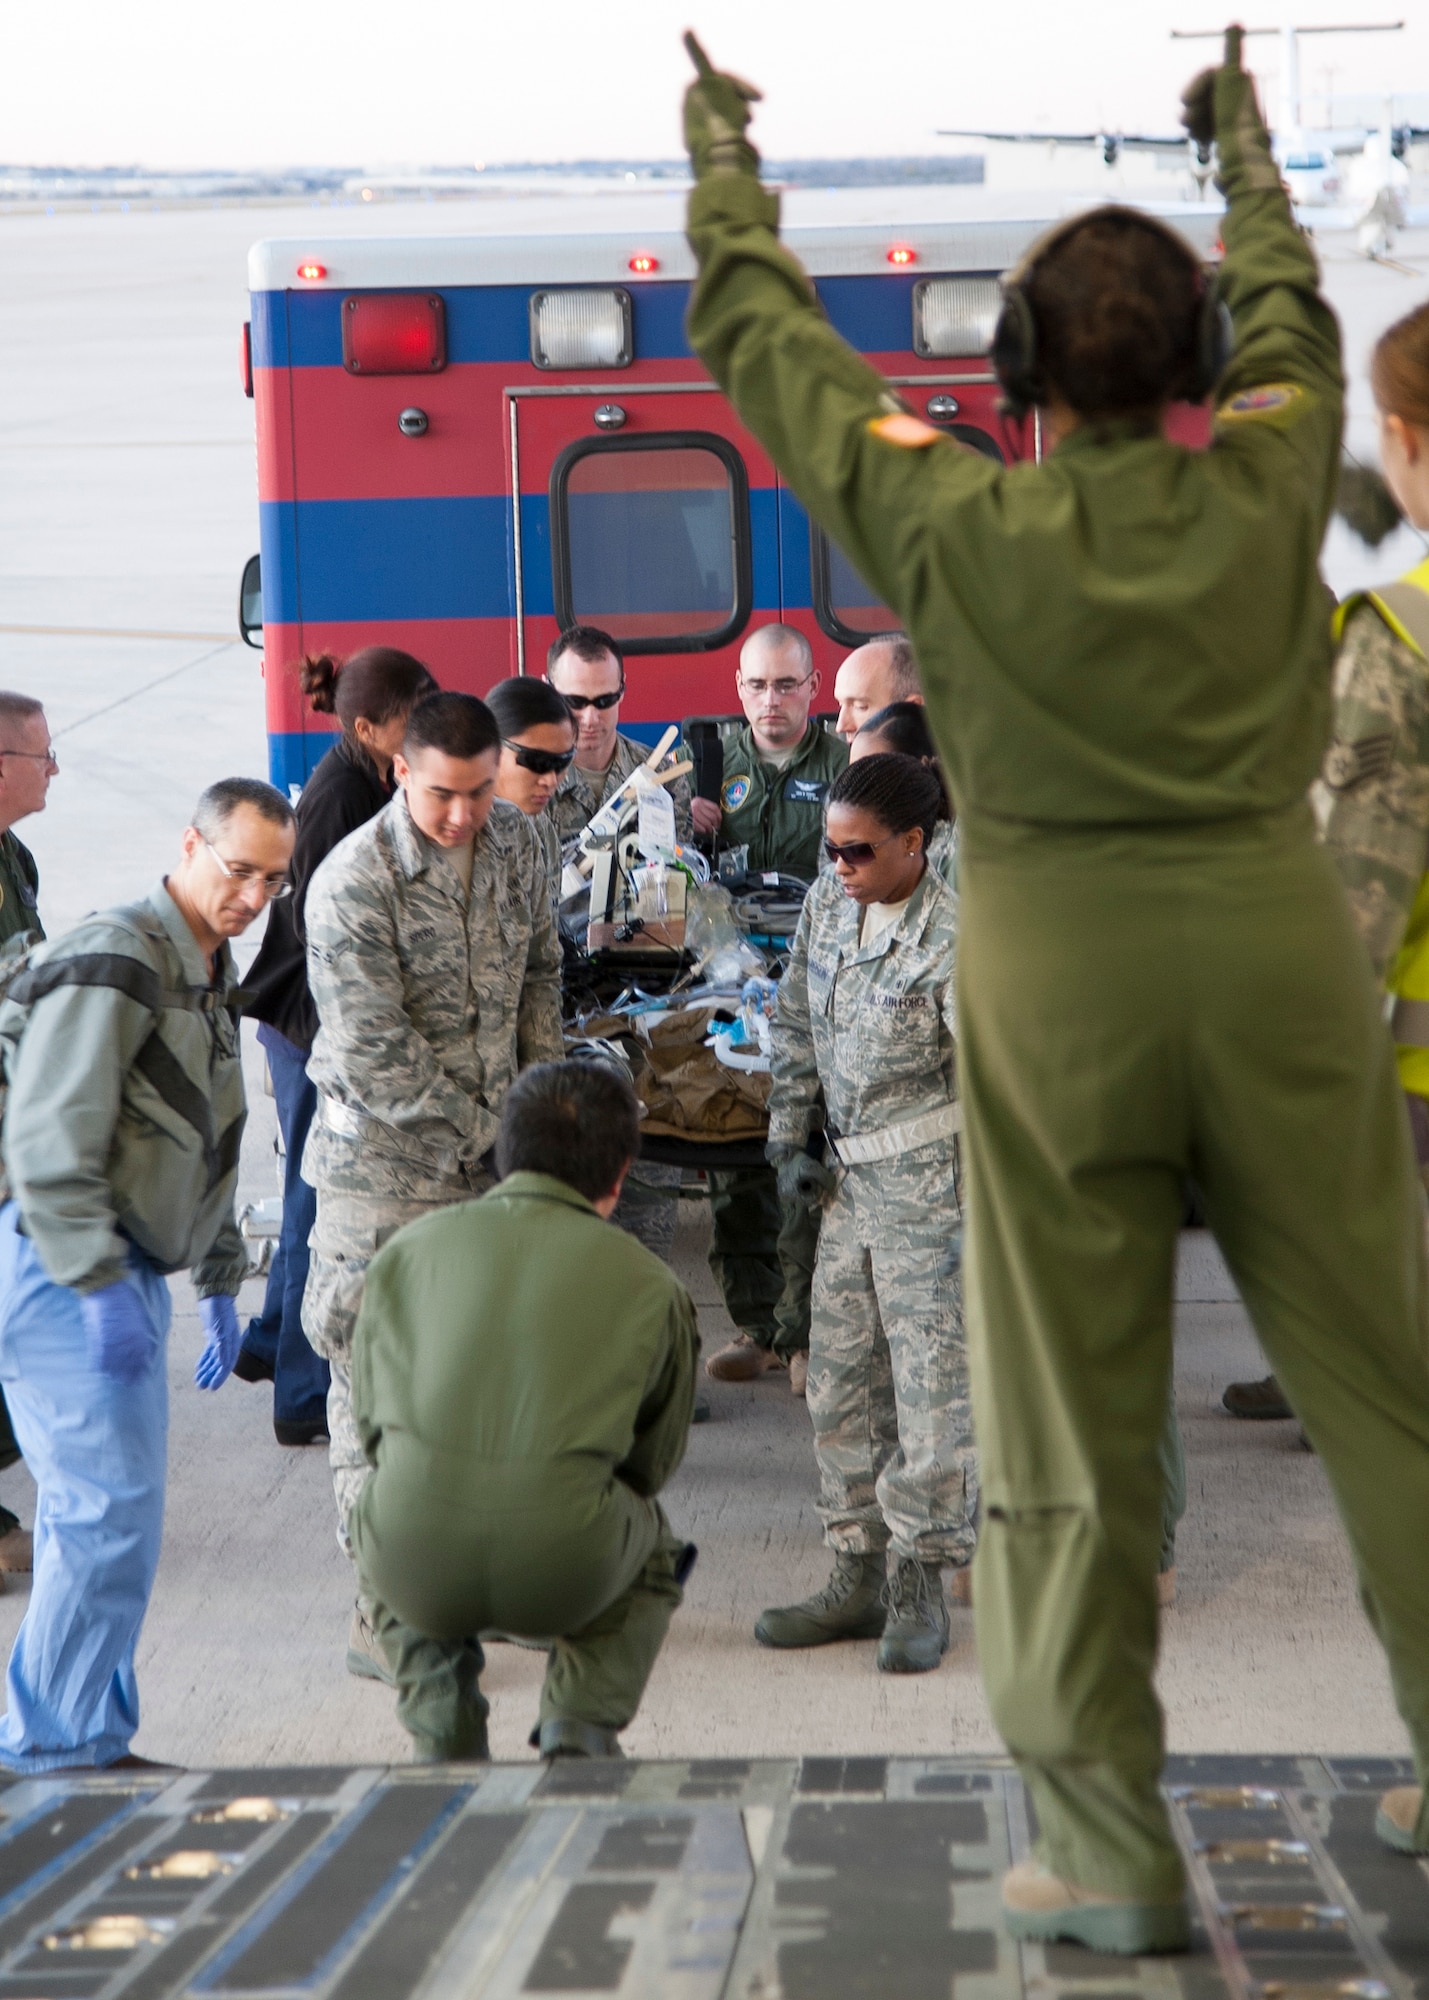 Members of the 59th Medical Wing Aeromedical Staging Facility transfer a patient being treated with an extracorporeal membrane oxygenation system into a C-17 Globemaster III, Jan. 16 at Joint Base San Antonio-Lackland, Texas. ECMO is a heart-lung bypass system that circulates blood through an external artificial lung and sends it back into the patient’s bloodstream. (U.S. Air Force photo/Staff Sgt. Kevin Iinuma)